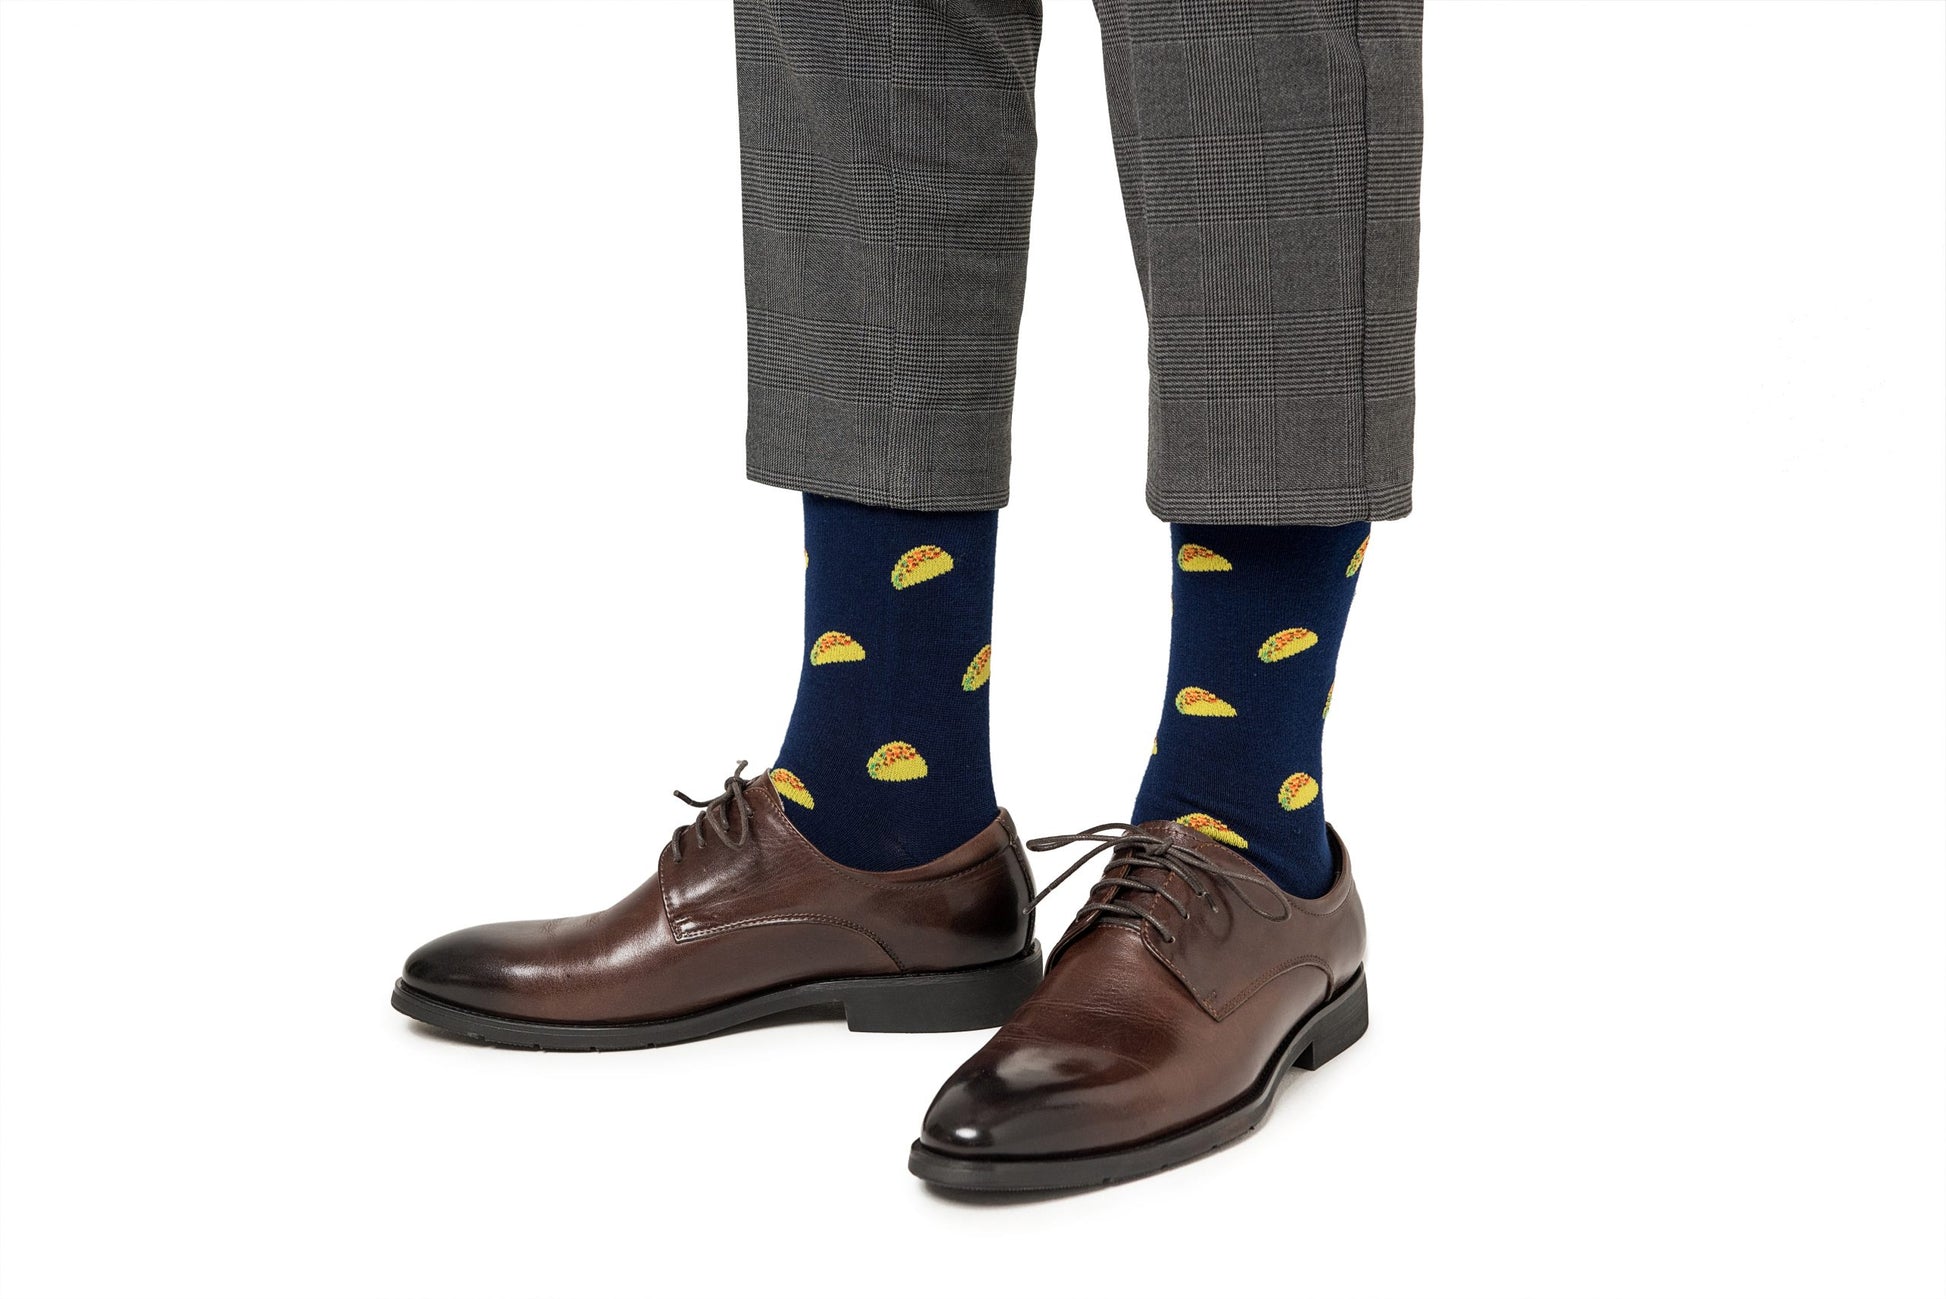 Man wearing Taco Socks and brown dress shoes.